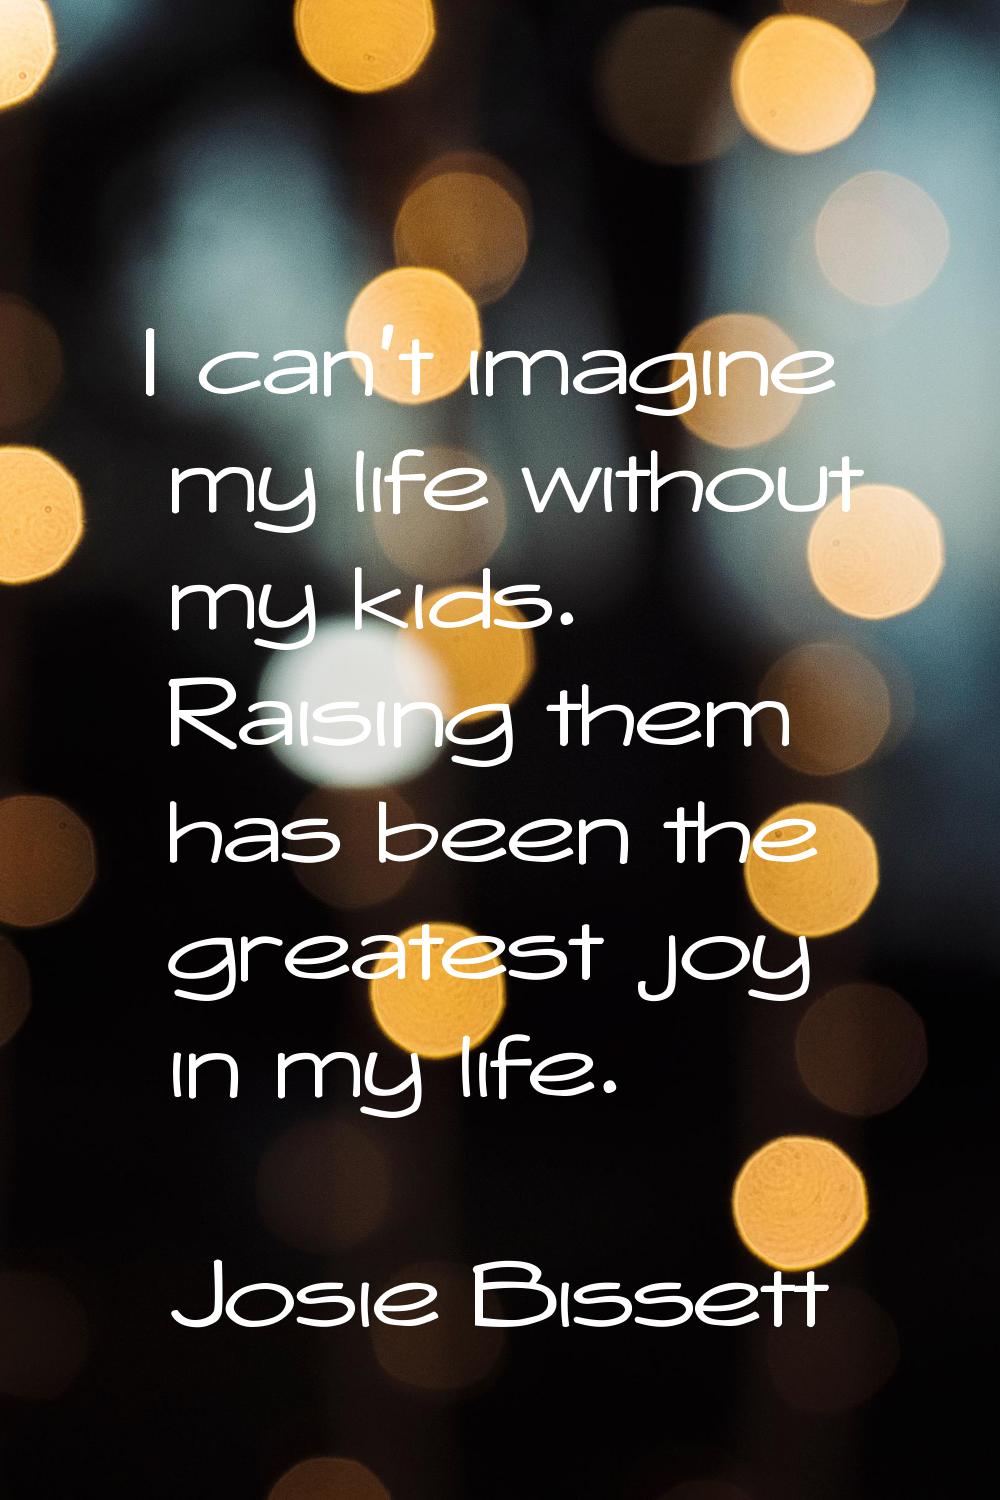 I can't imagine my life without my kids. Raising them has been the greatest joy in my life.